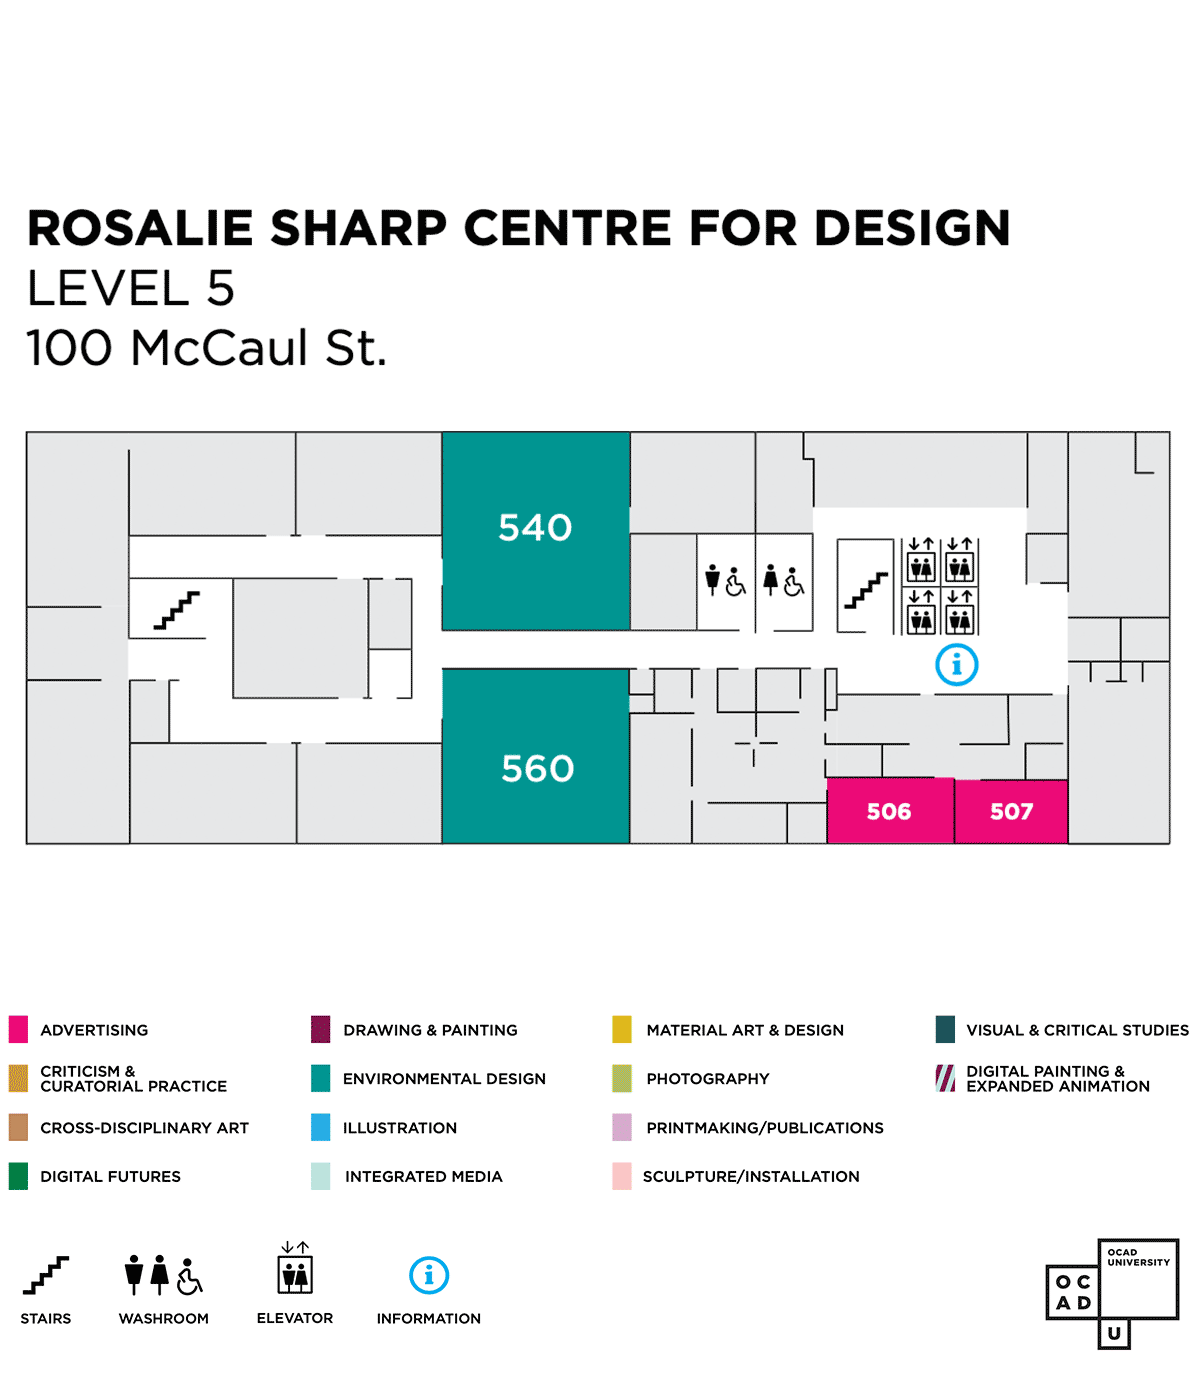 Map of 100 McCaul street level 5. Exhibitions in rooms 506, 507, 540, 560.